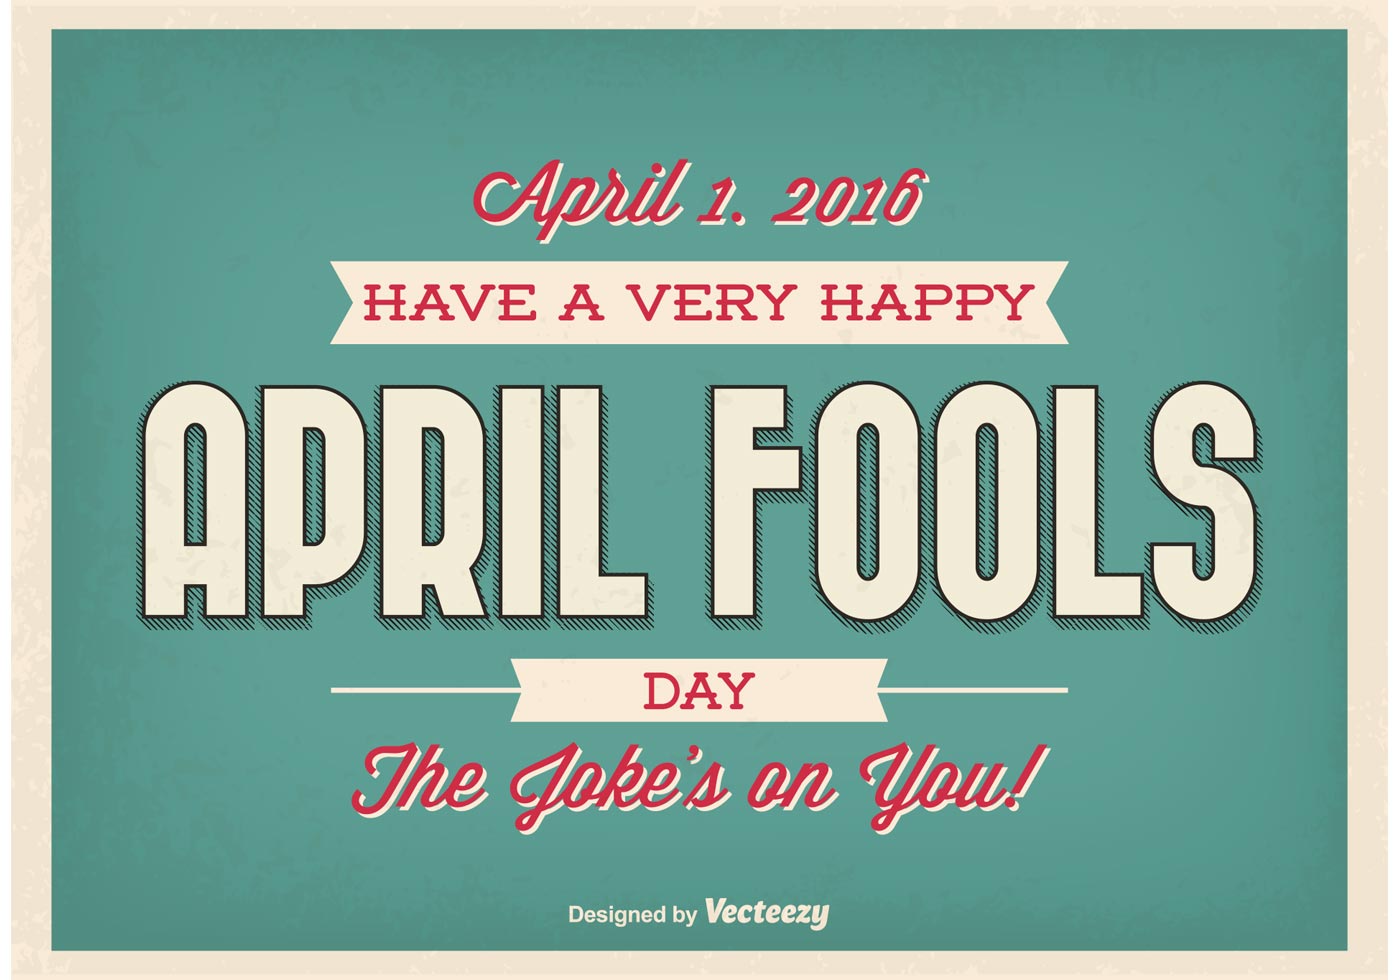 5 Brilliant April Fools Day Pranks Depicted Throughout History | funny